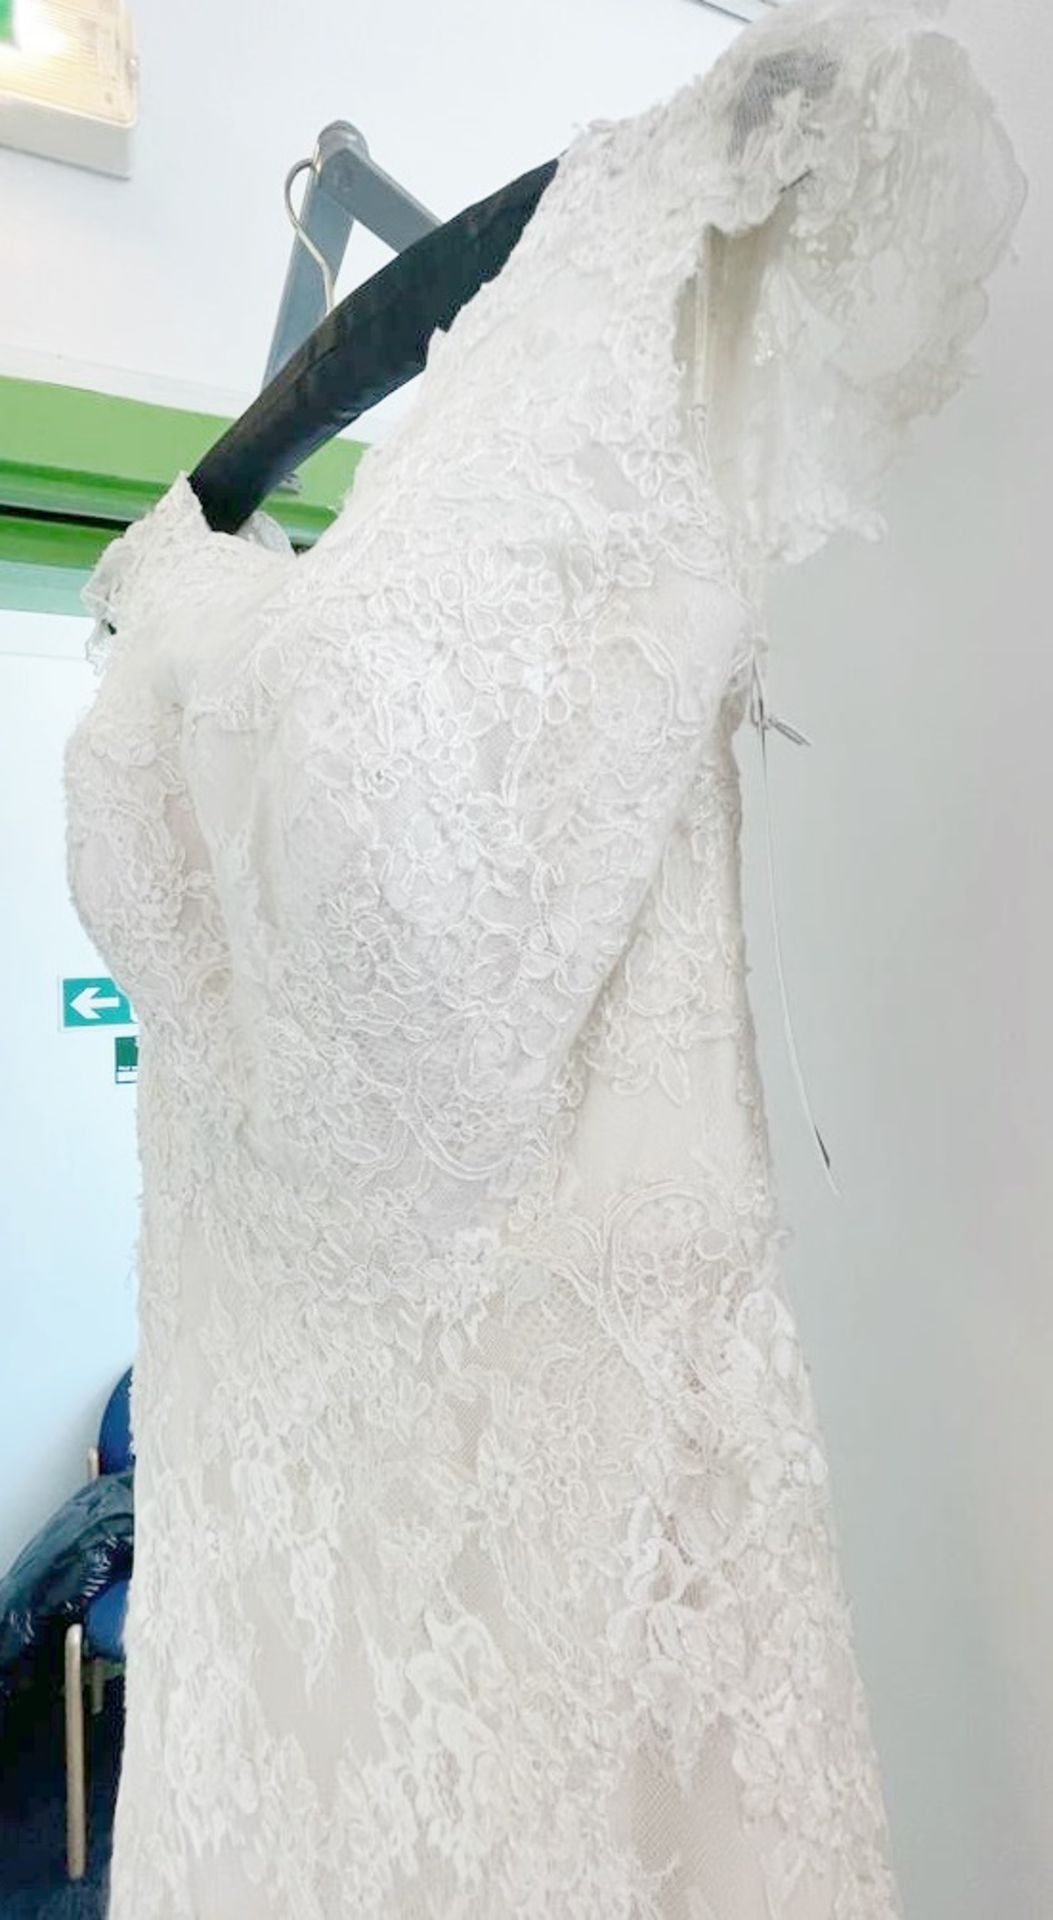 1 x LUSAN MANDONGUS 'Tabia' Fishtail Designer Wedding Dress Bridal Gown, With Chantilly Lace - Image 7 of 15